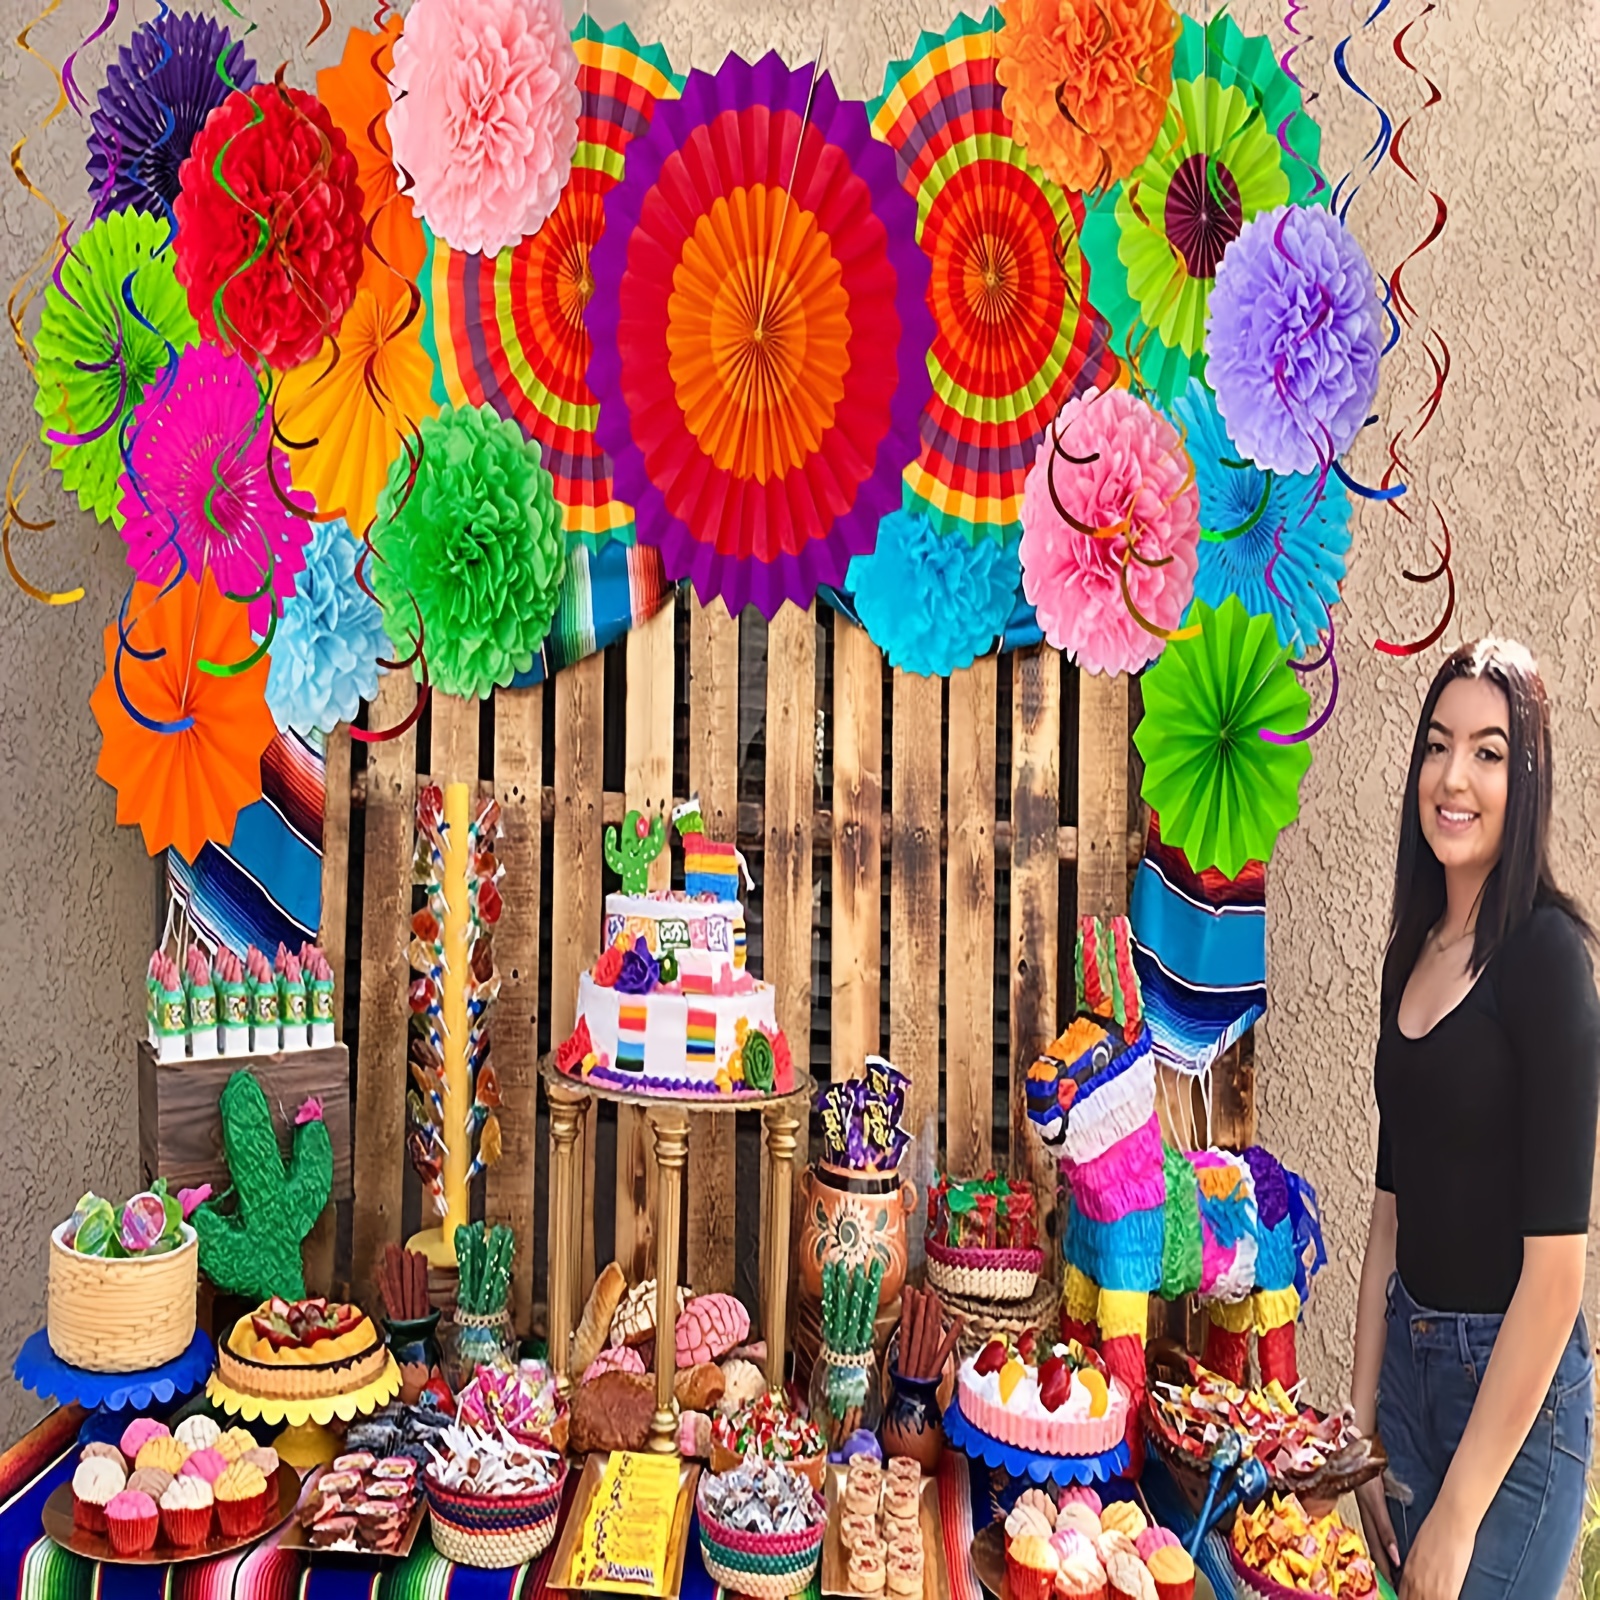 Fiesta Party Supplies and Decorations